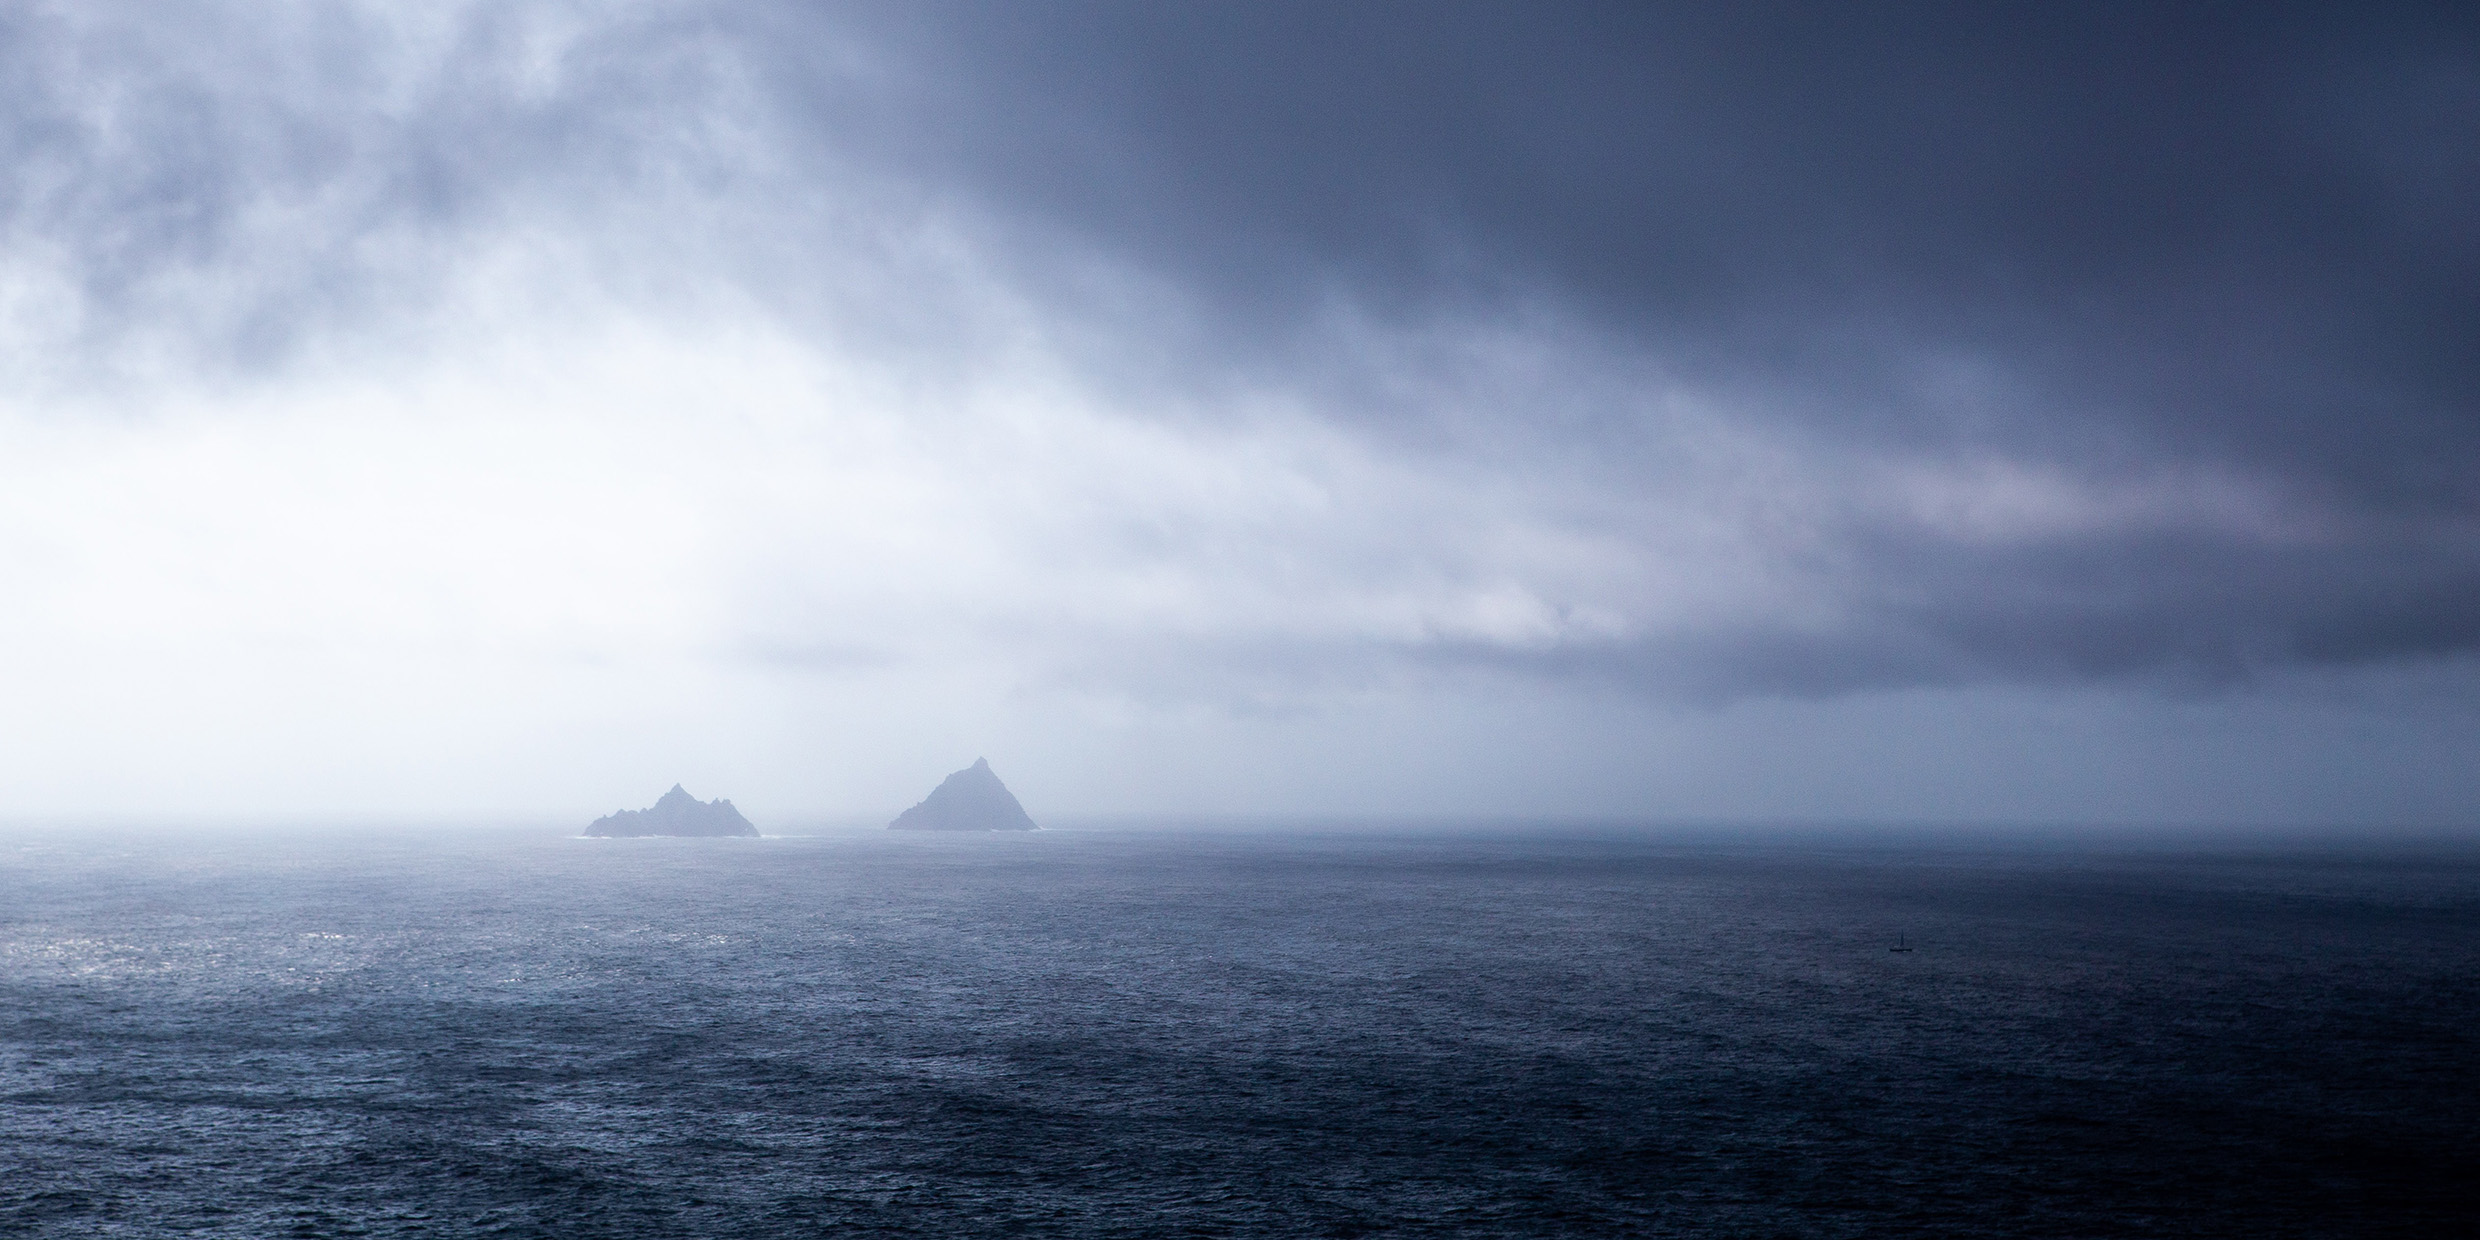 Image of two jagged windswept islands in a wide, dark ocean